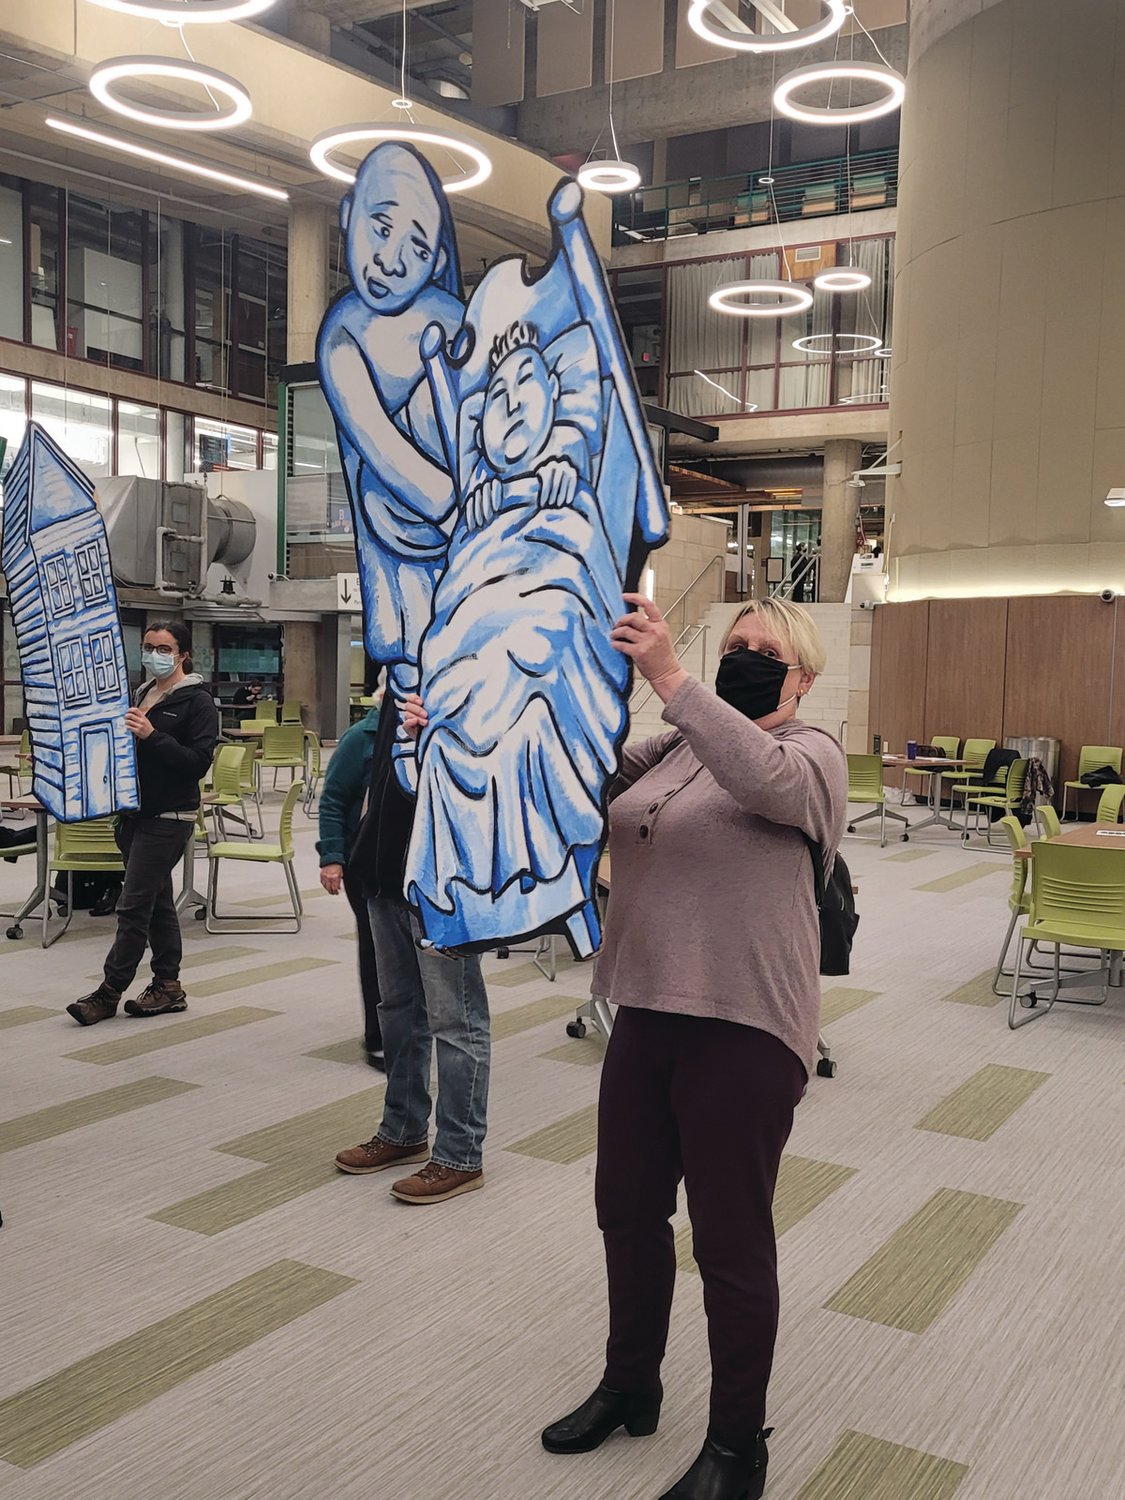 GIMME SHELTER: Members of the Rhode Island Homeless Advocacy Project carried life-size cutouts representing “unsheltered” Ocean State residents, during a RI 2030 public forum Tuesday night. 